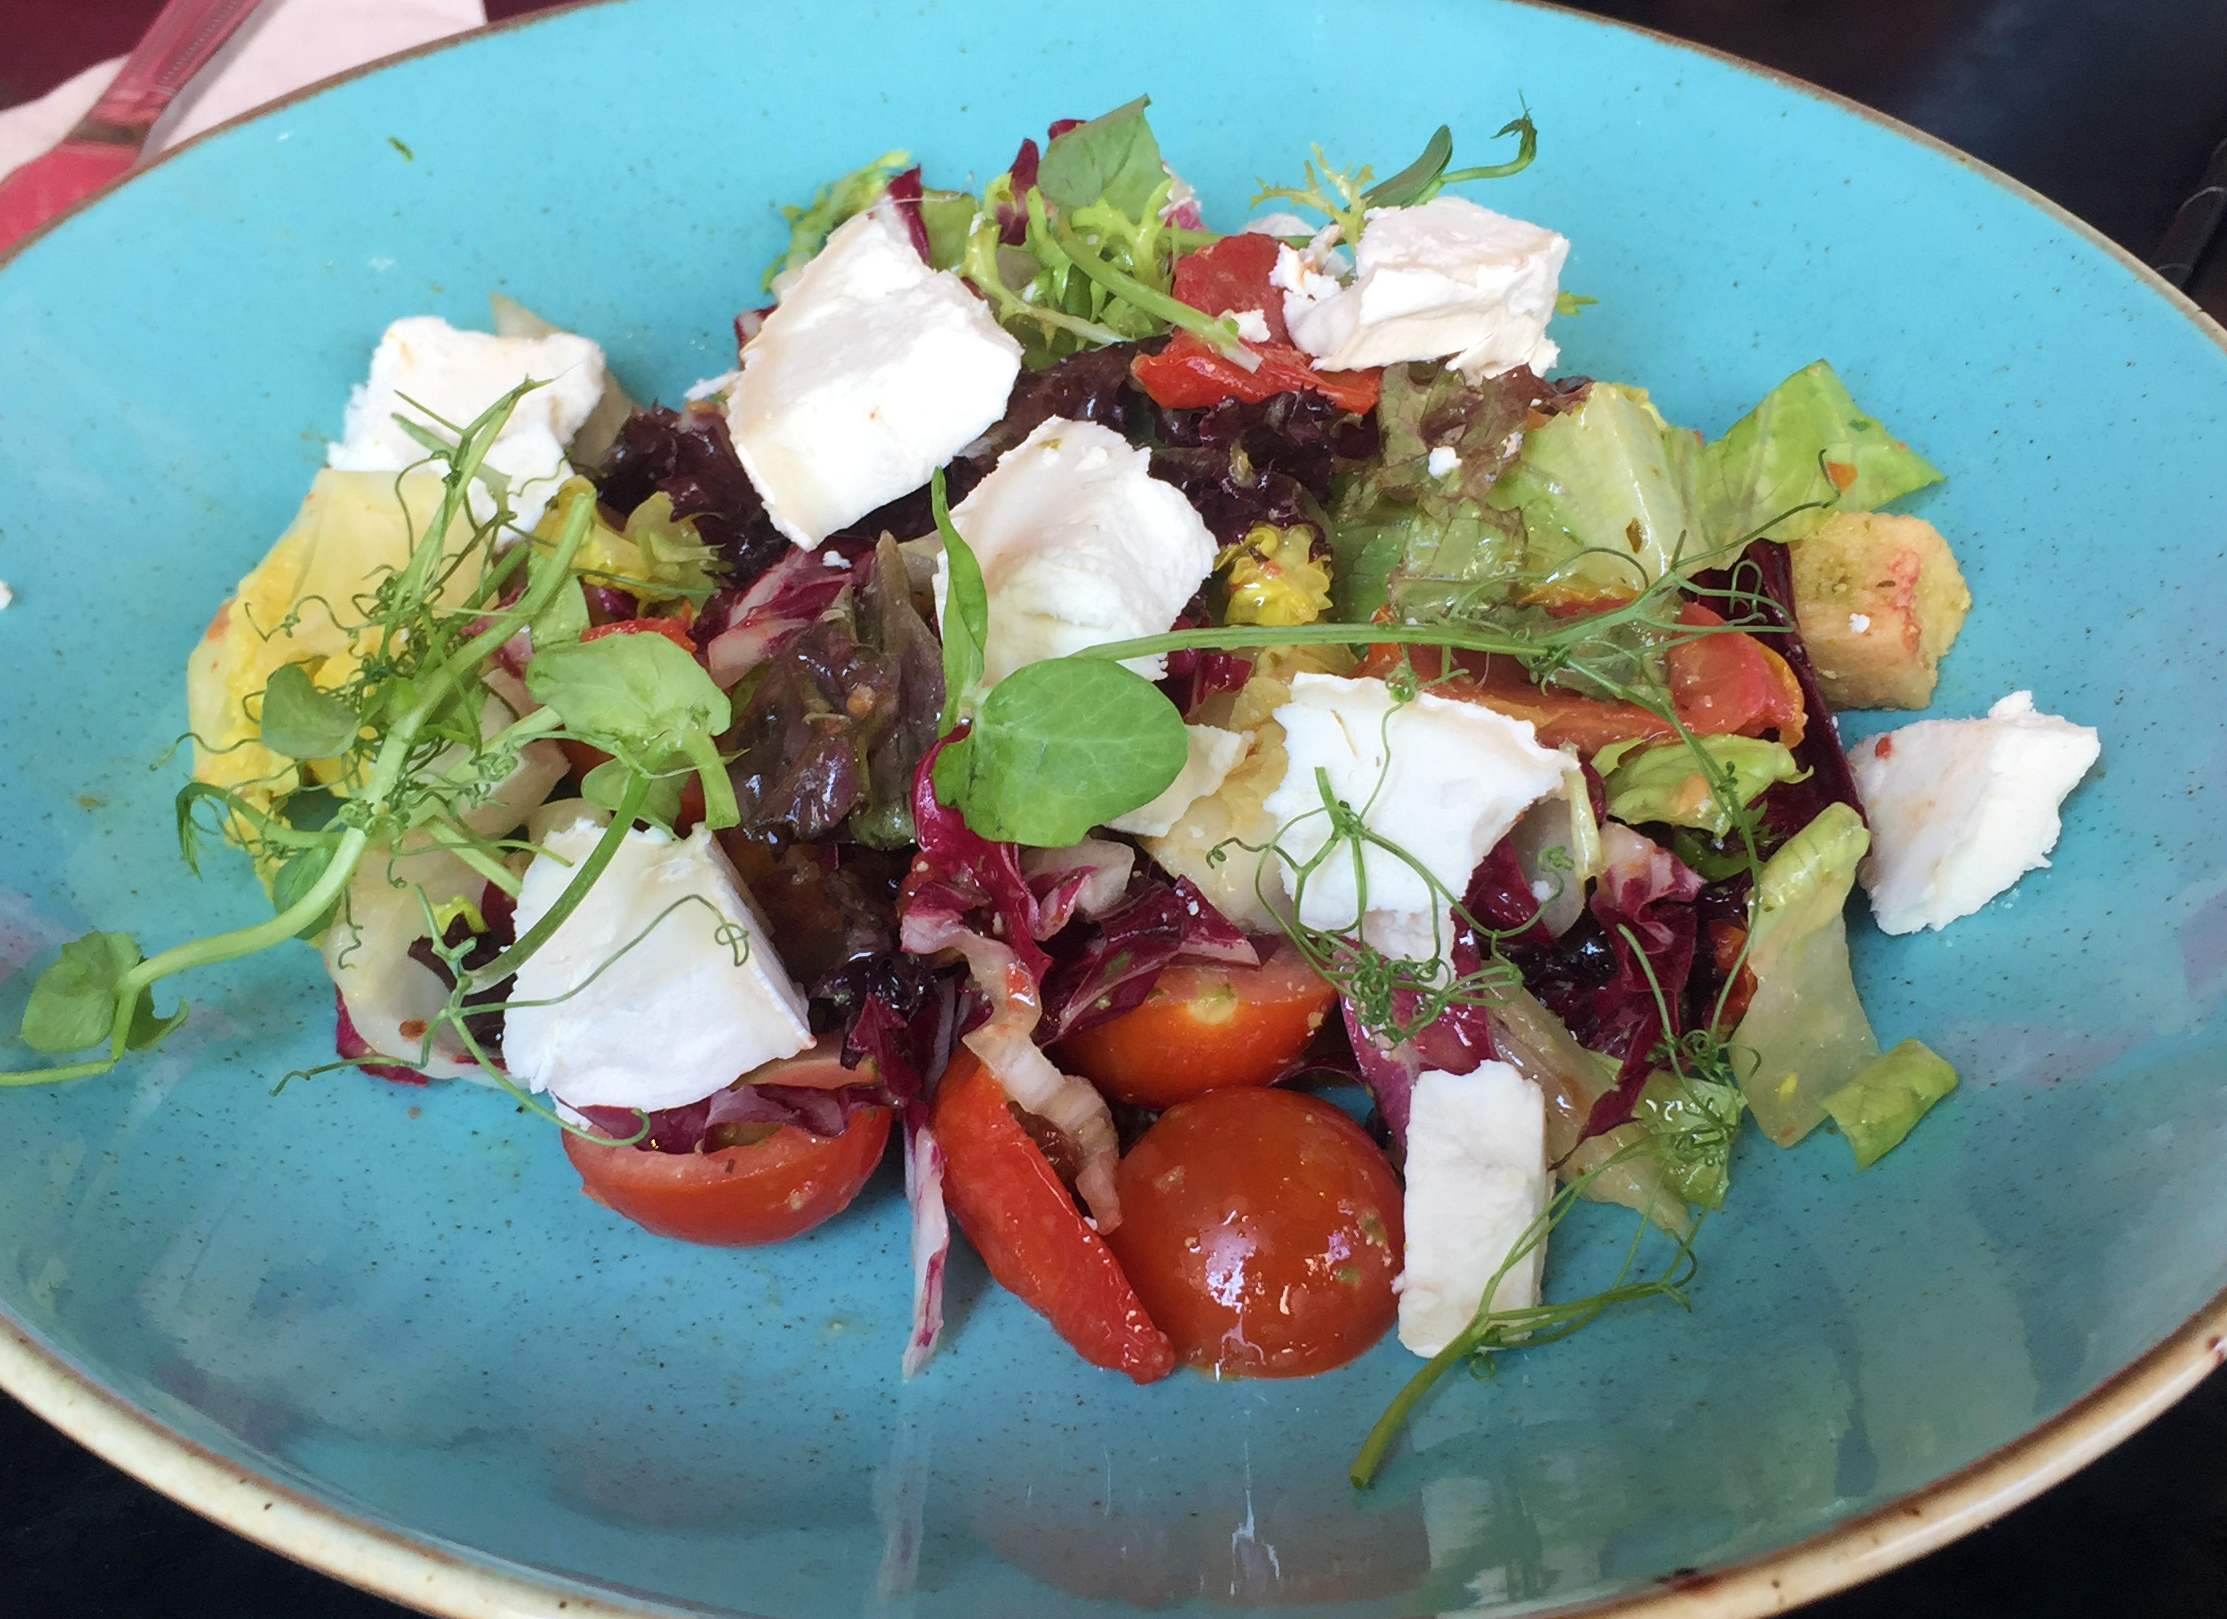 Goats cheese salad was a delightful, light dish for a hot summers day